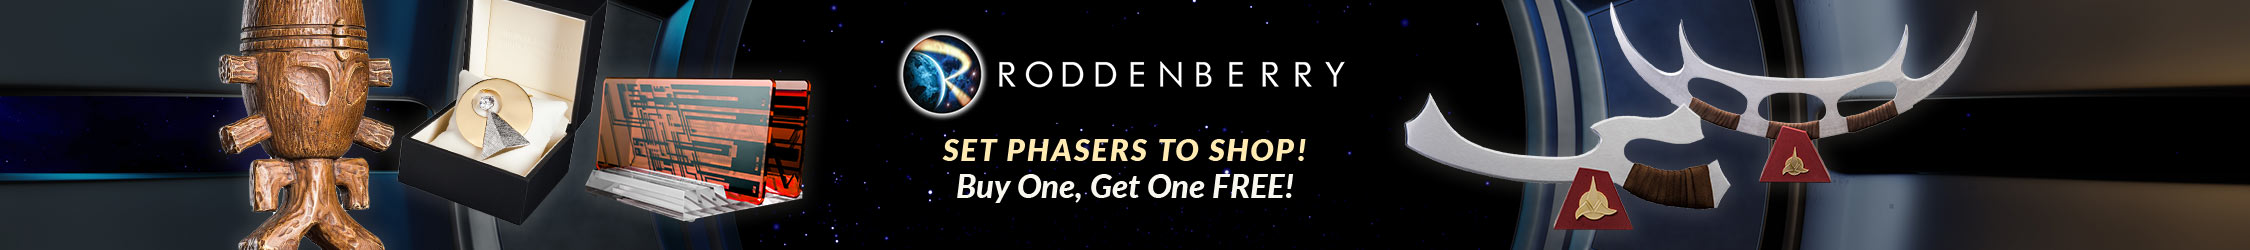 Roddenberry Buy One Get One Free